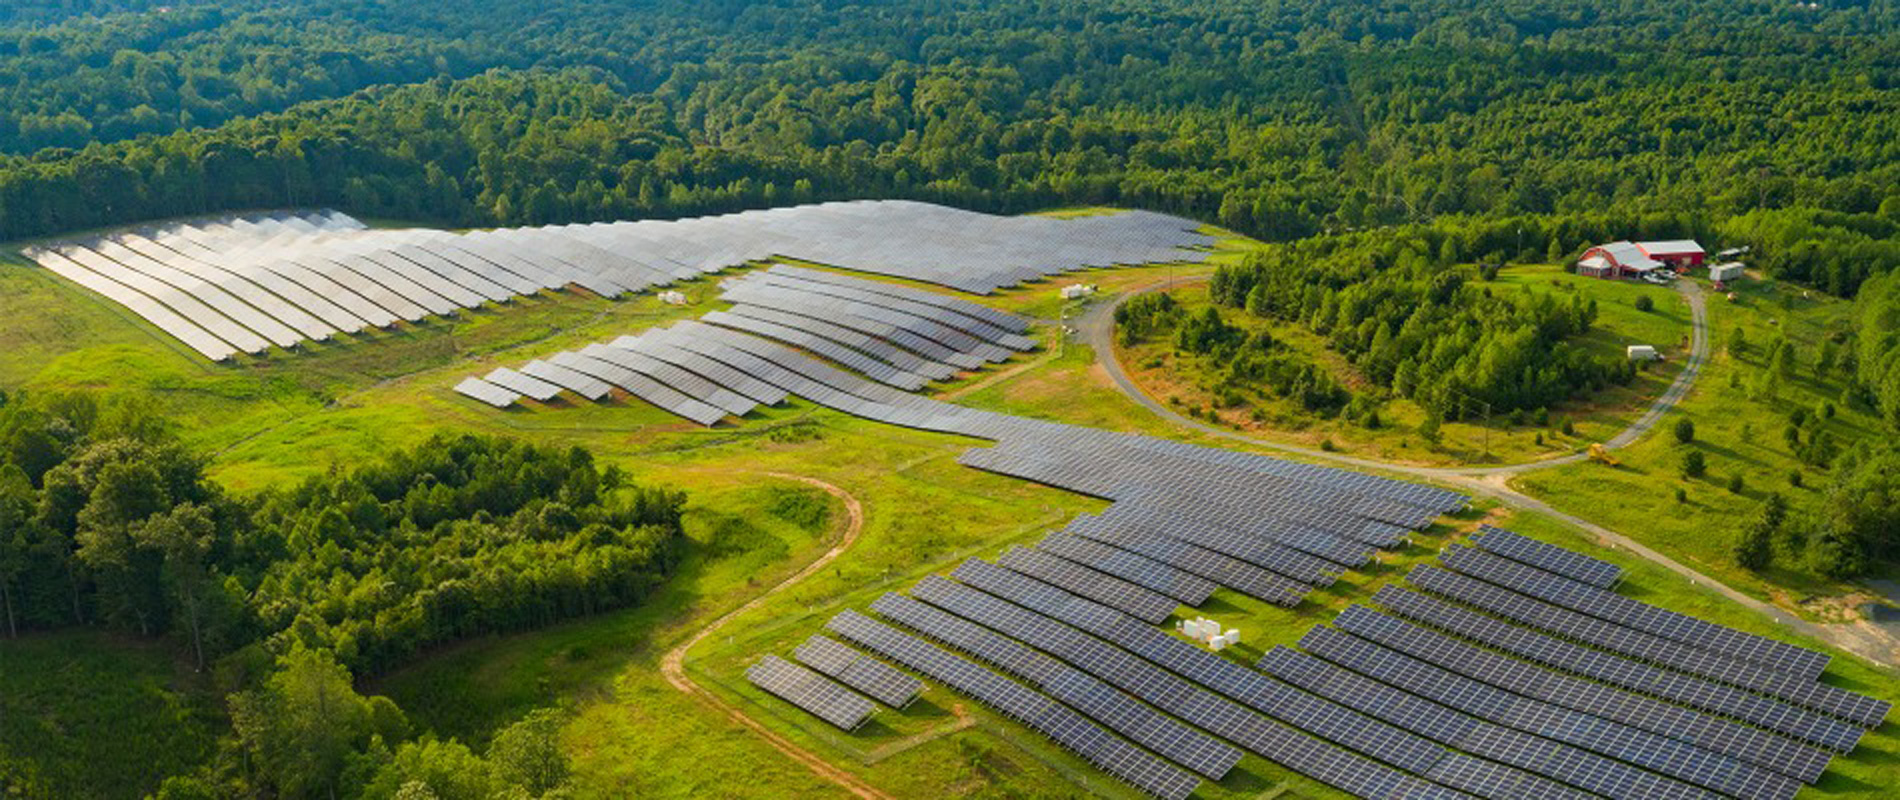 Aerial view of a solar farm with trees and a red farm house.